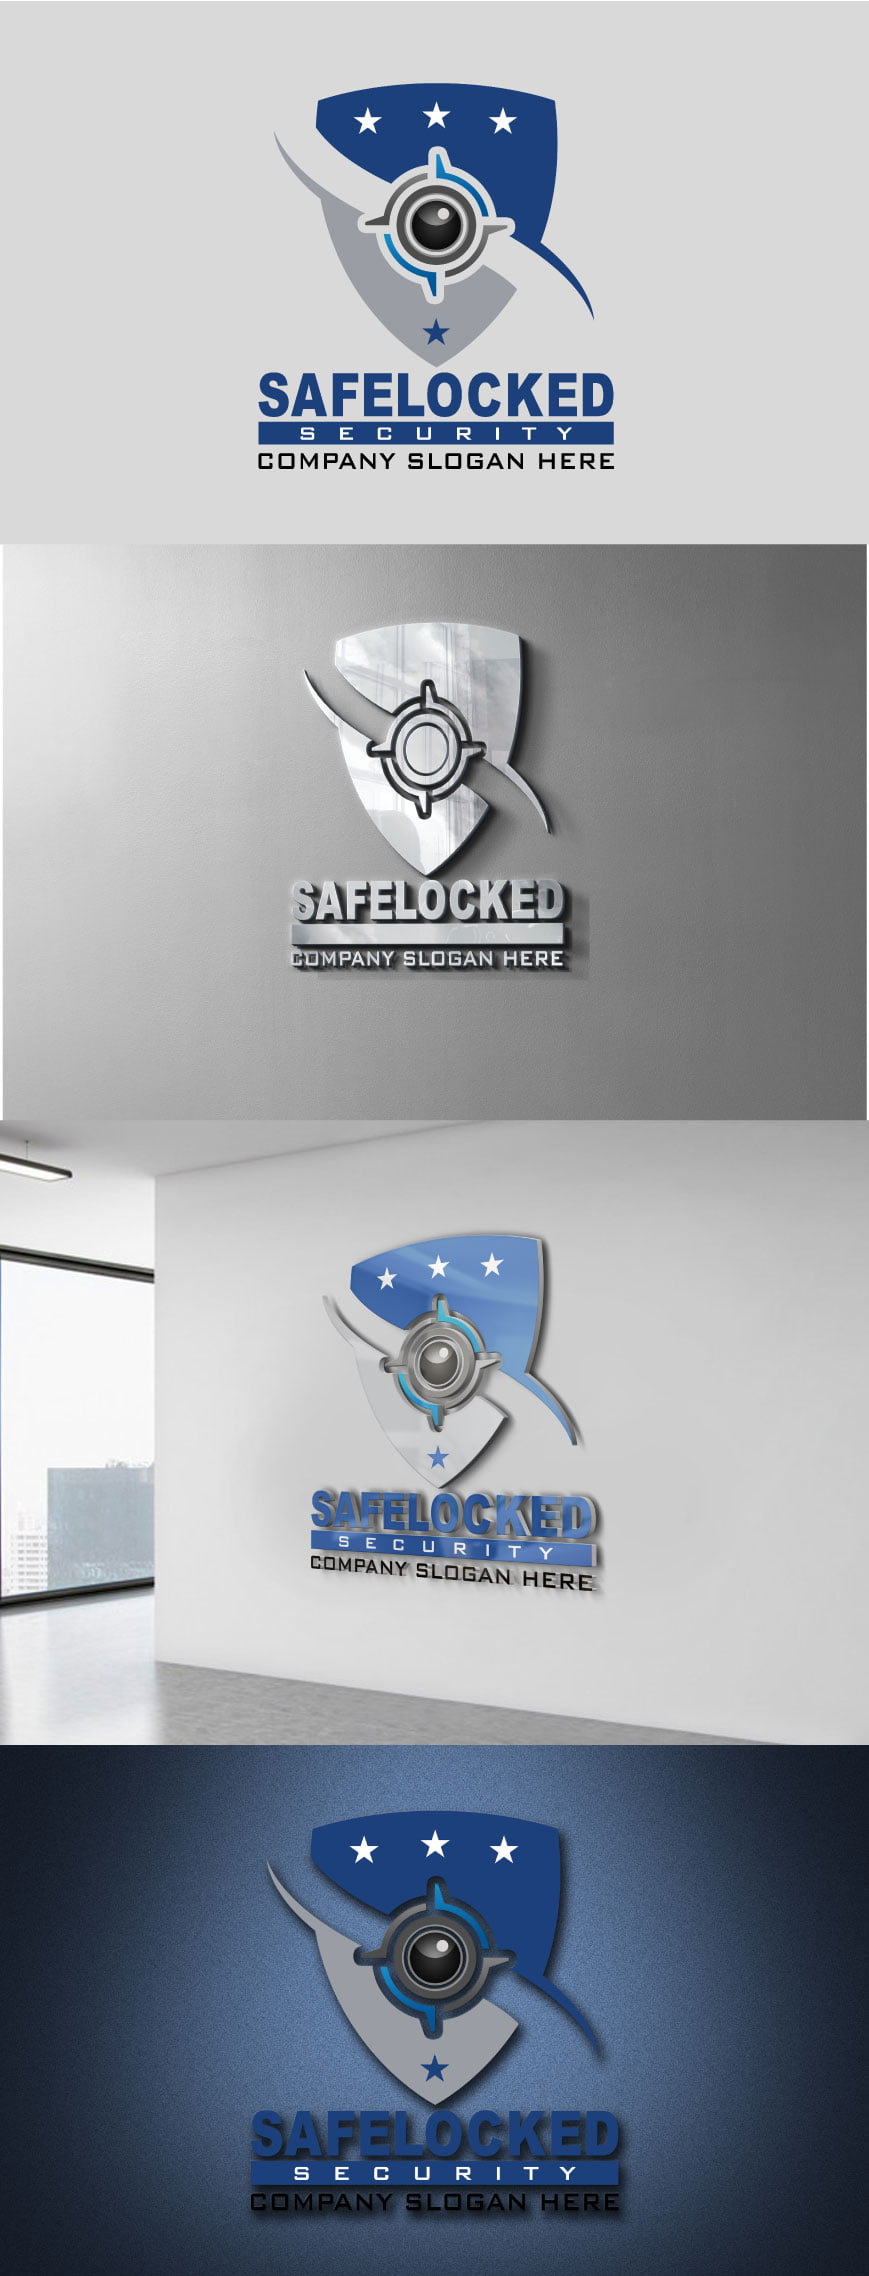 Free Security Logo Design PSD Template – GraphicsFamily